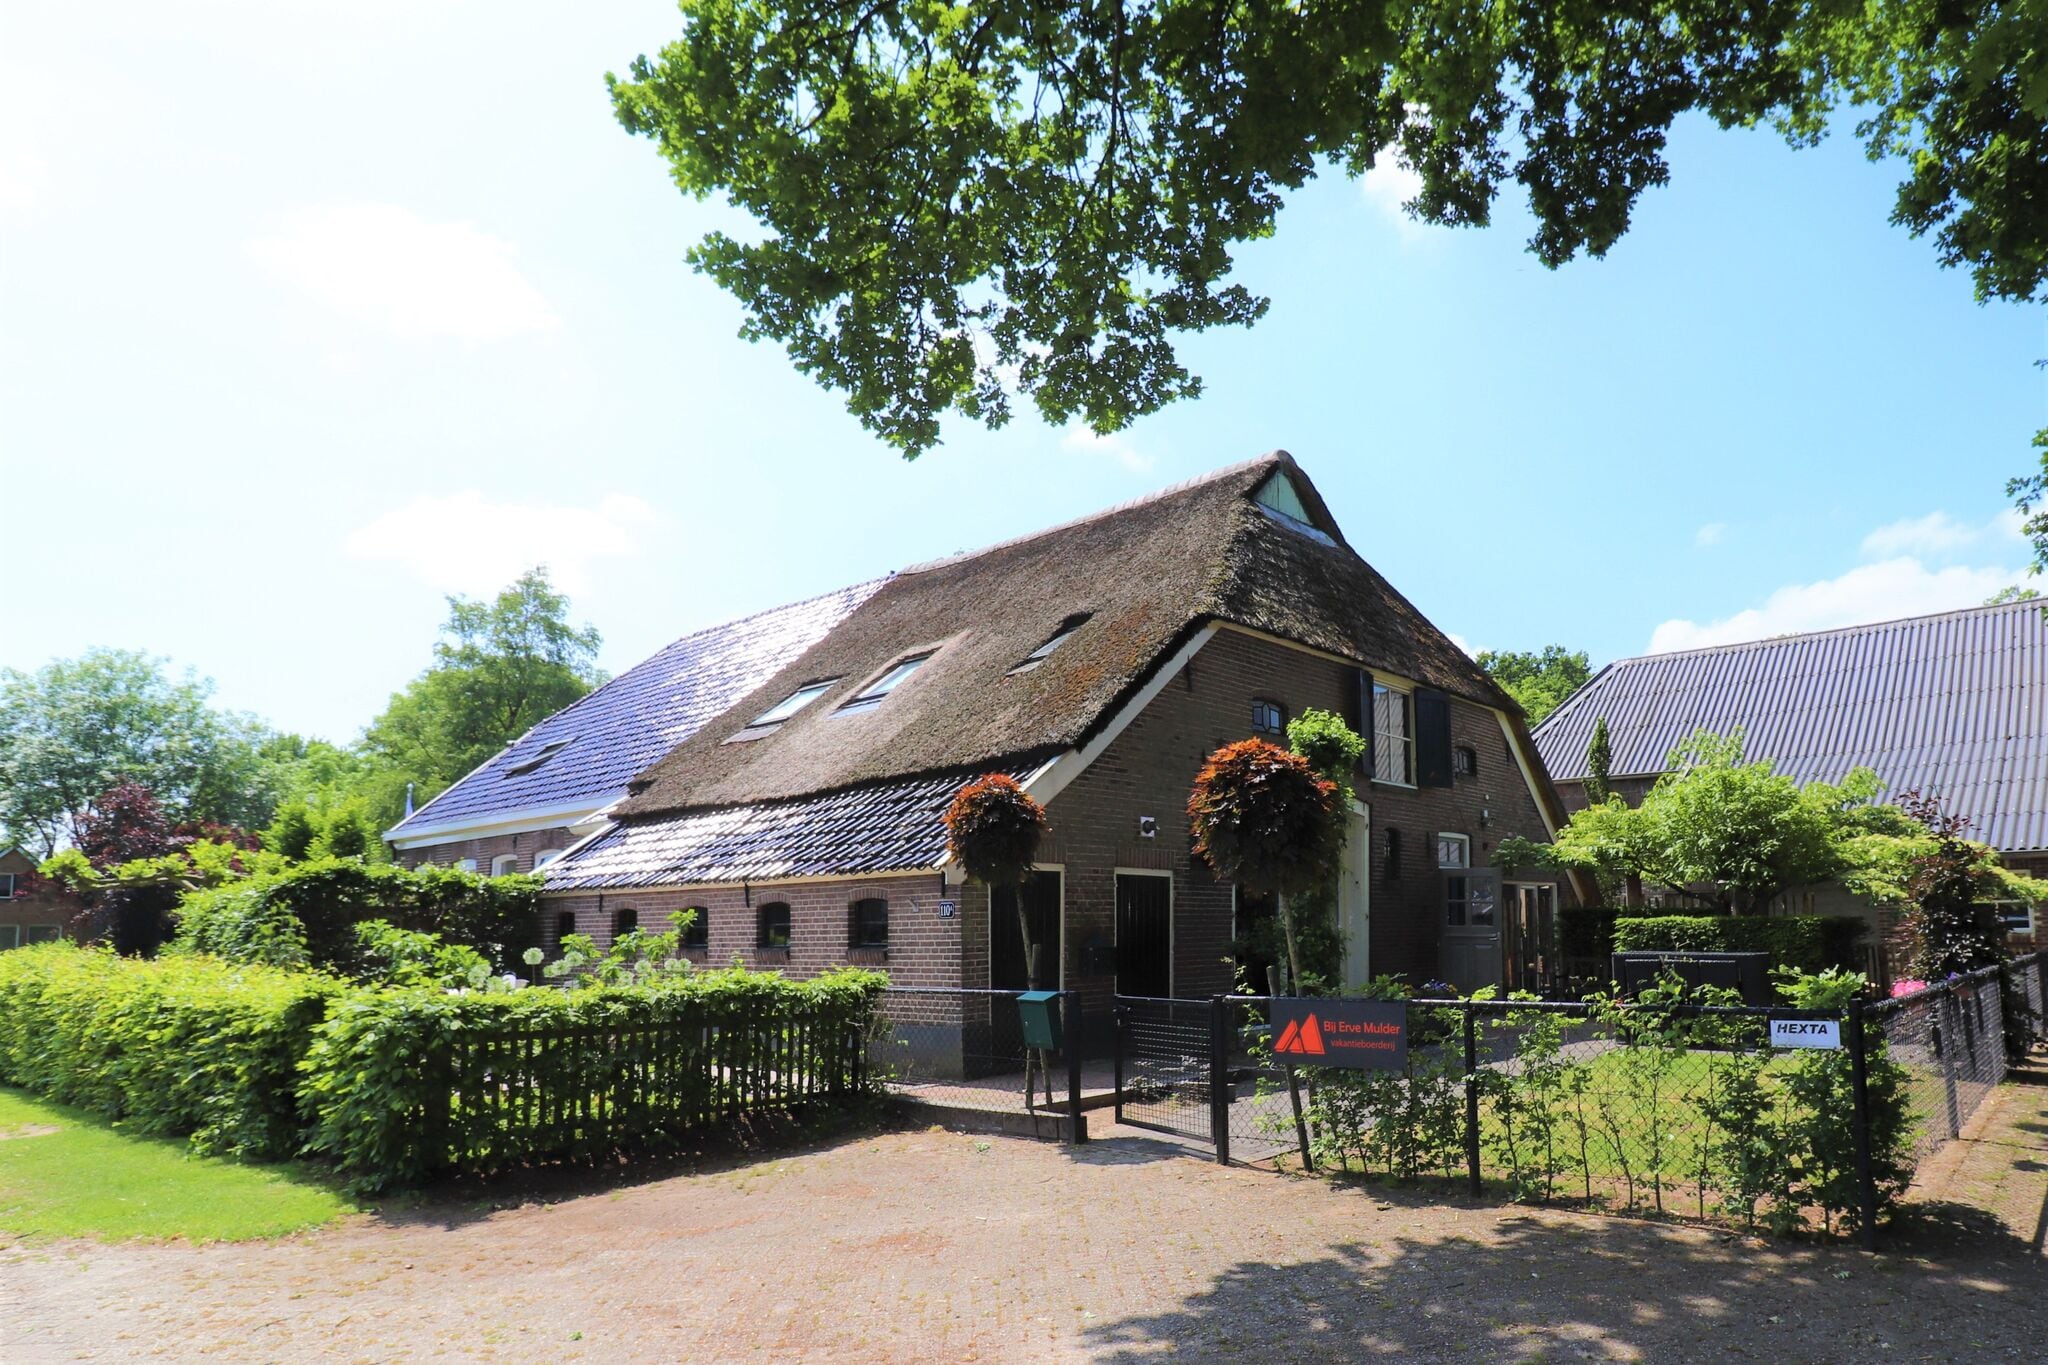 Large farmhouse in Dalerveen with a nice terrace